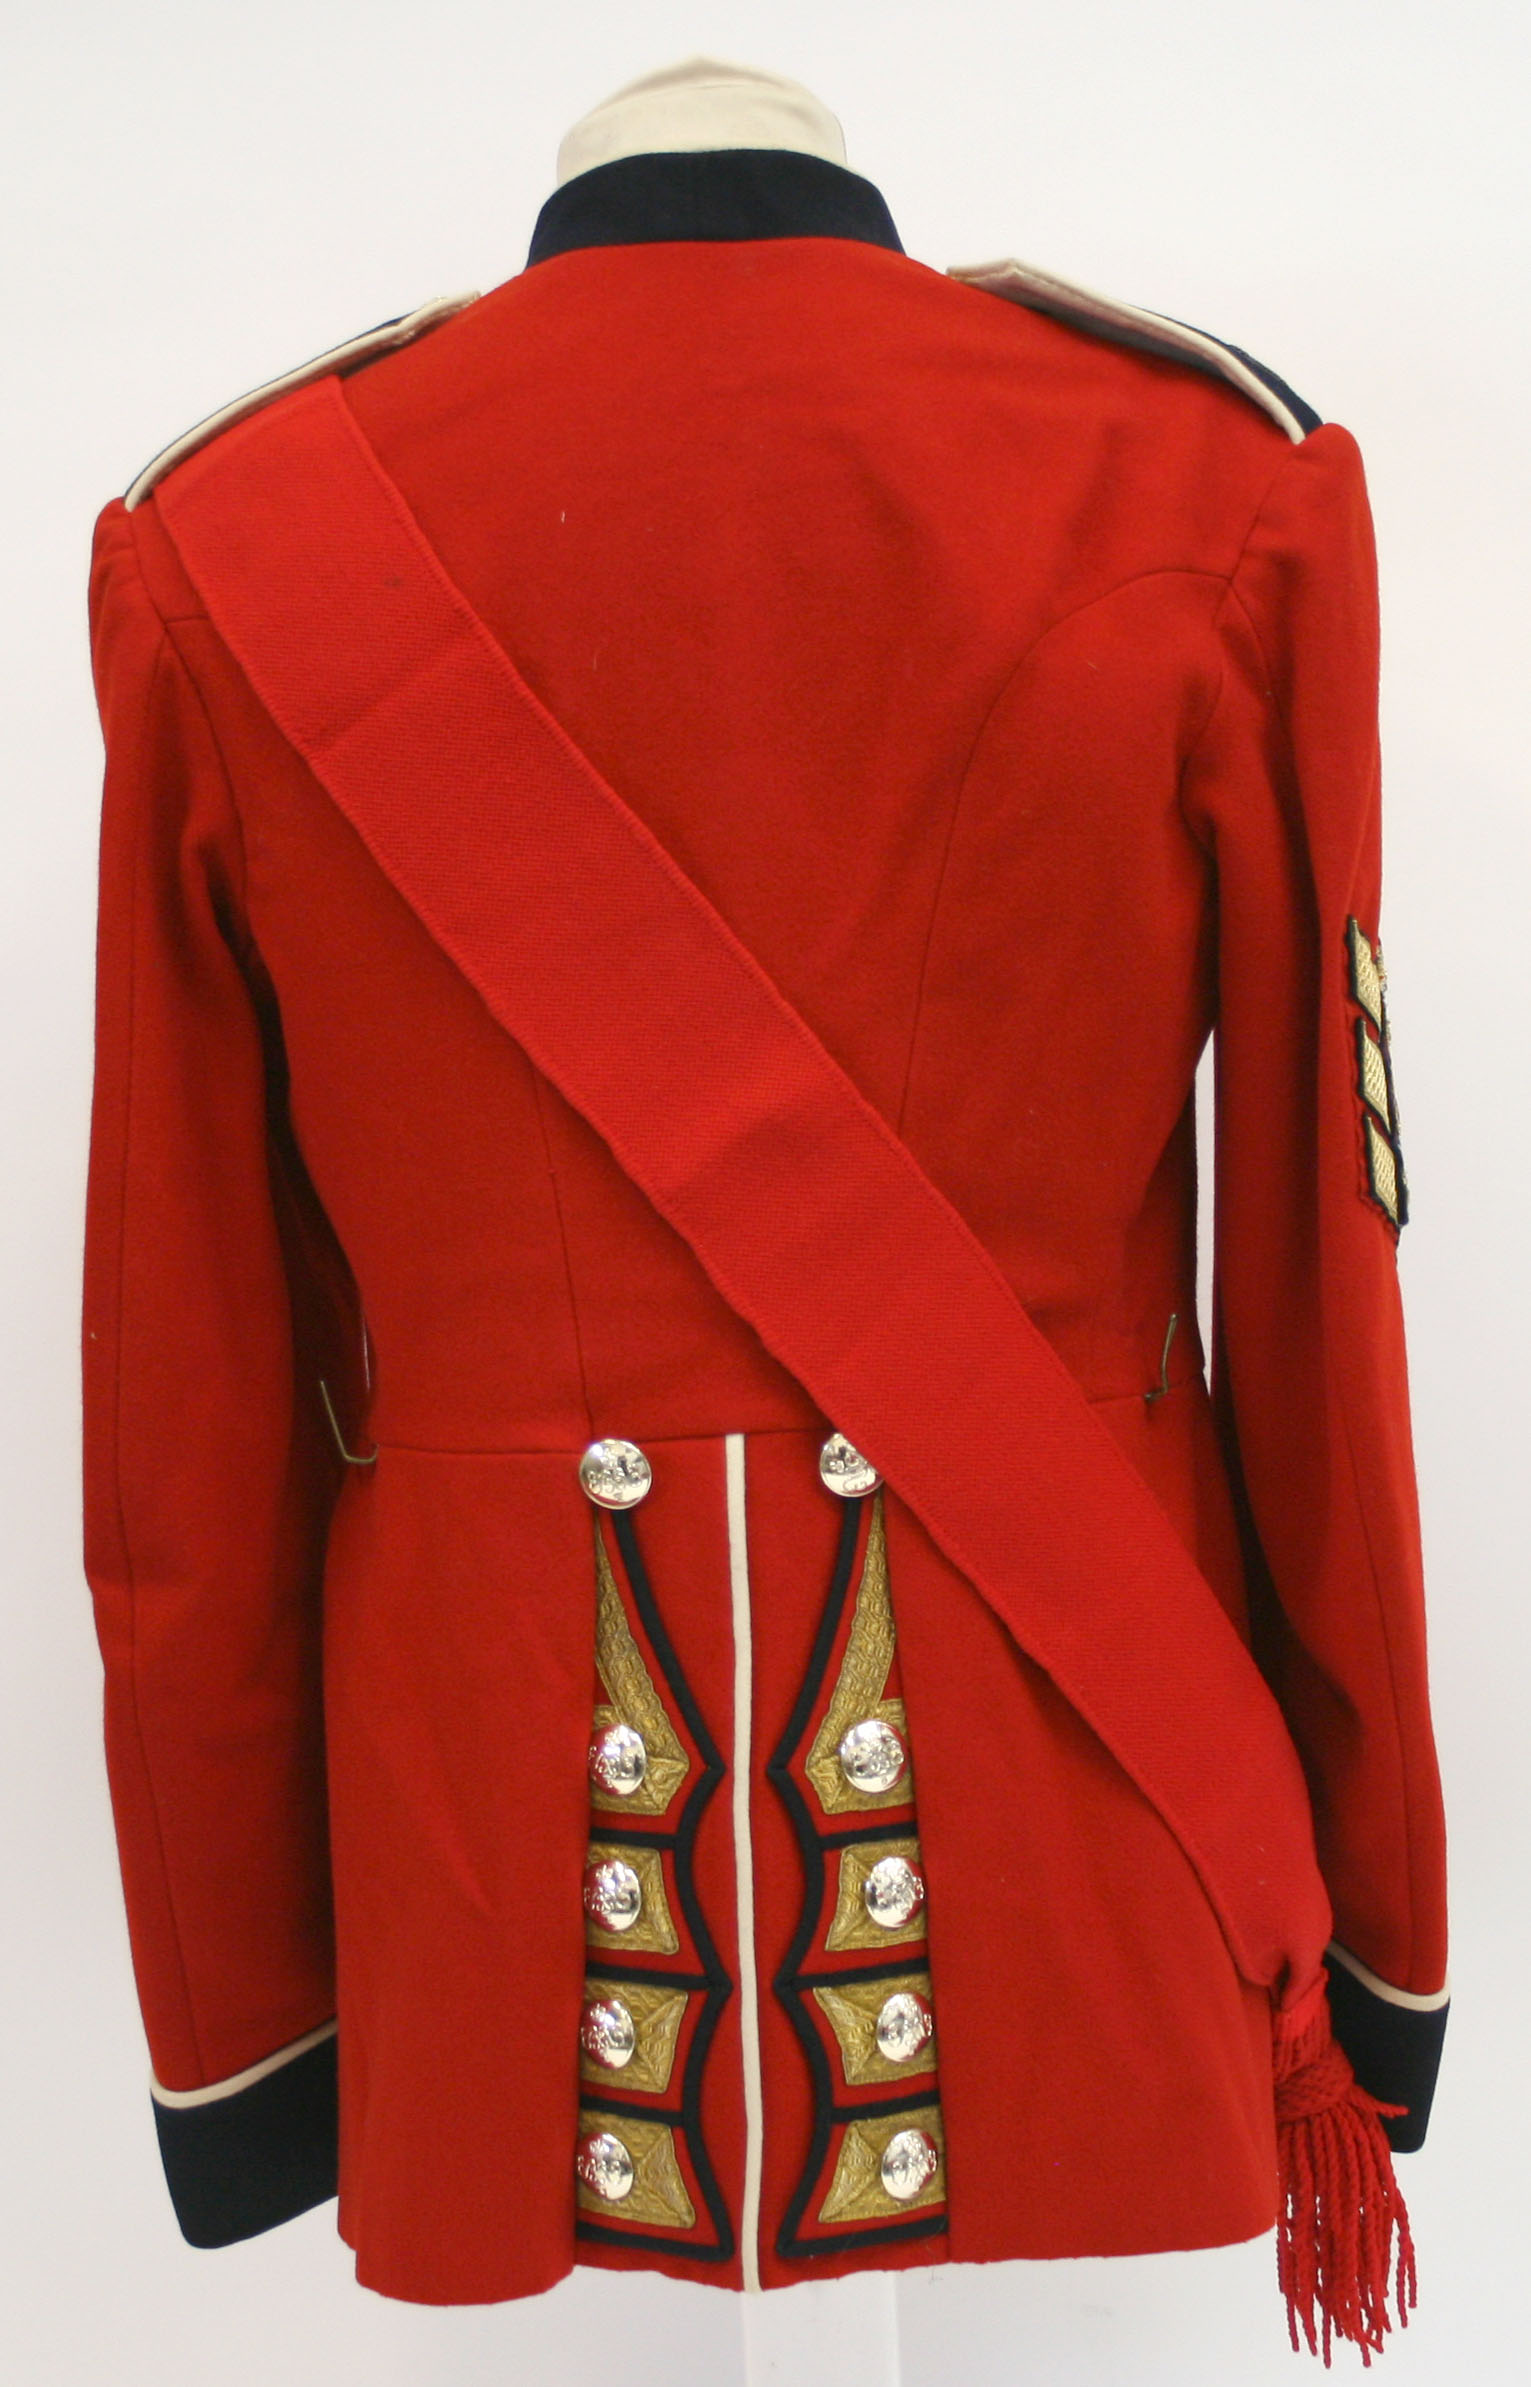 Post 1953 Grenadier Guards Colour Sergeants Dress Tunic of fine red cloth with staybright regimental - Image 4 of 4